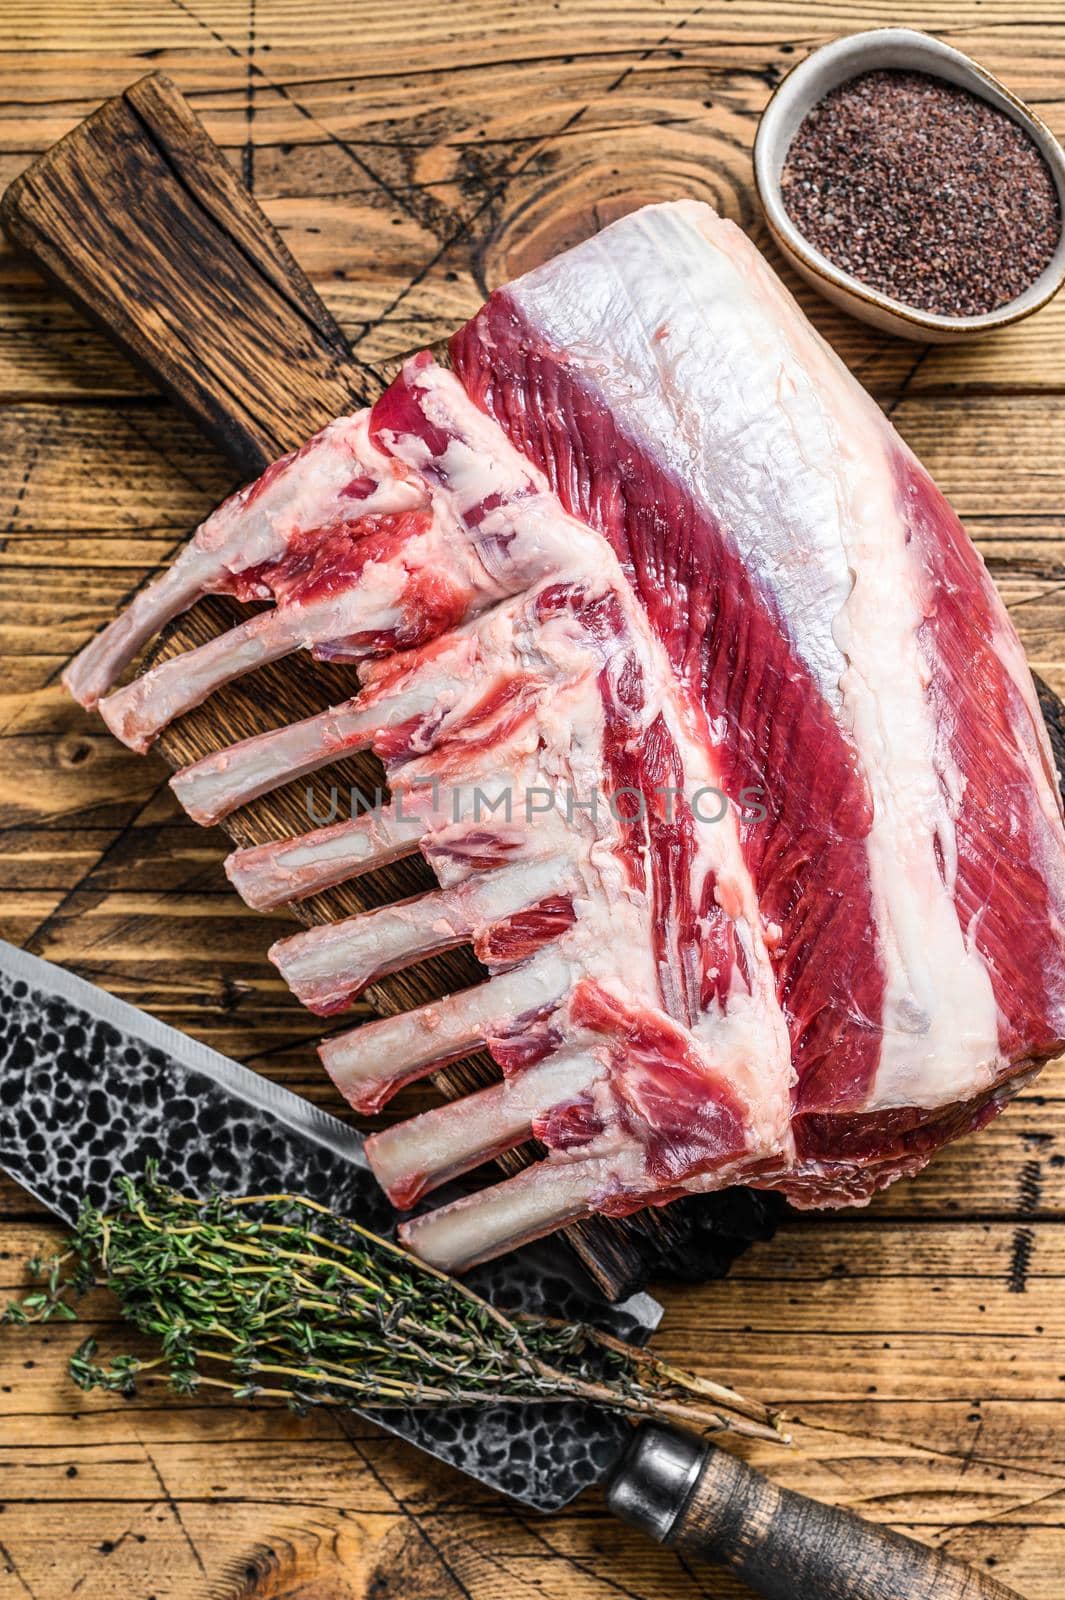 Raw Lamb ribs rack on a cutting board with knife. wooden background. Top view.